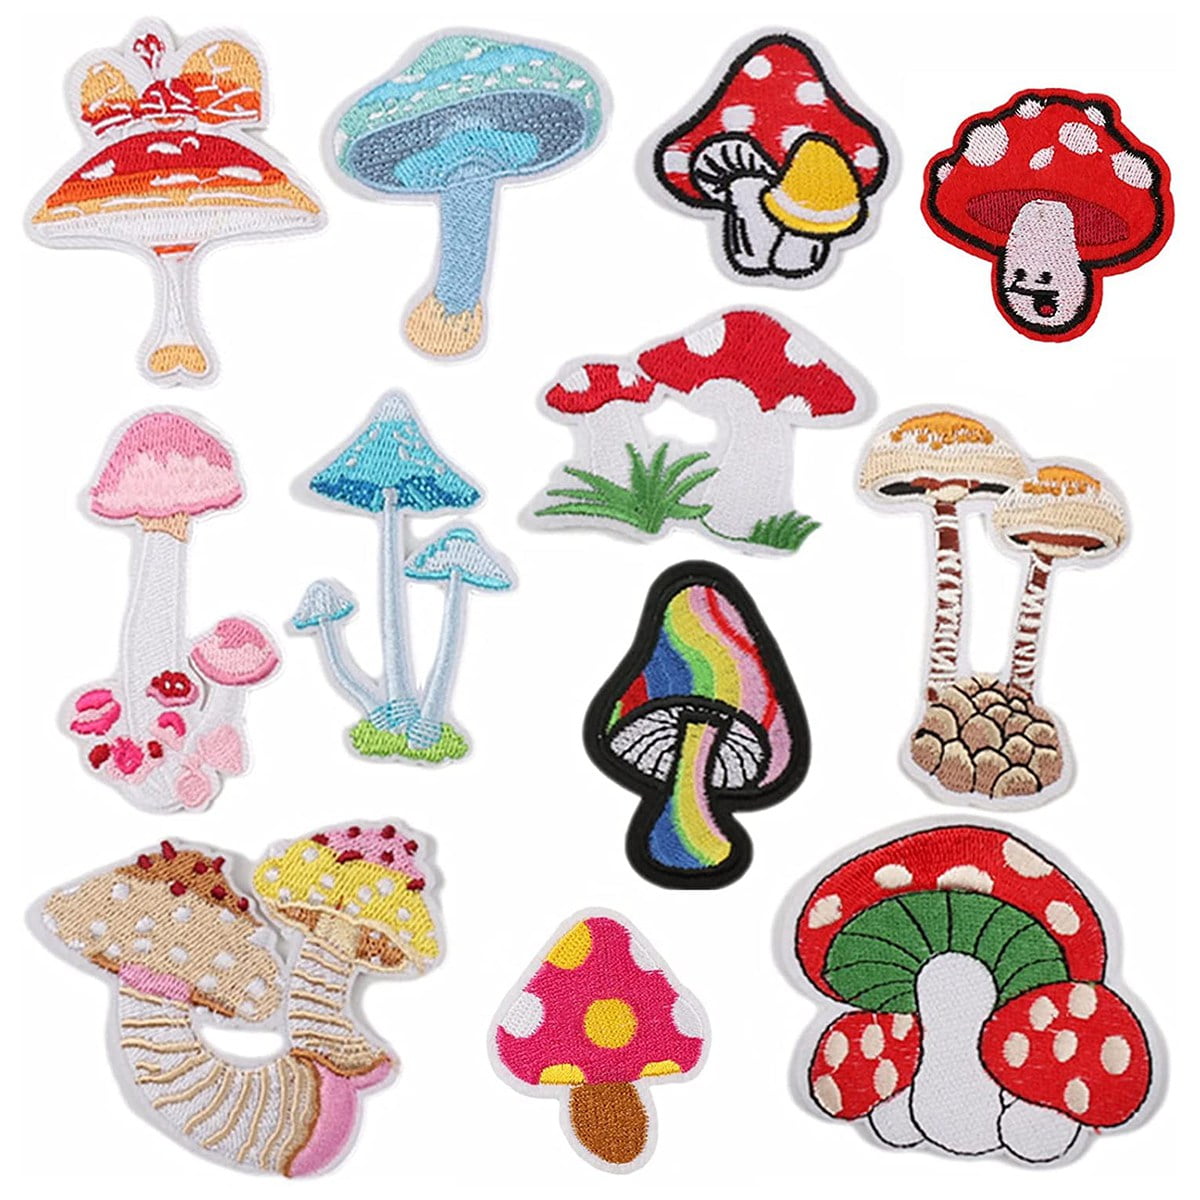 Magic Mushroom Patch Embroidered Badge Embroidery Applique Iron Sew On Clothing 